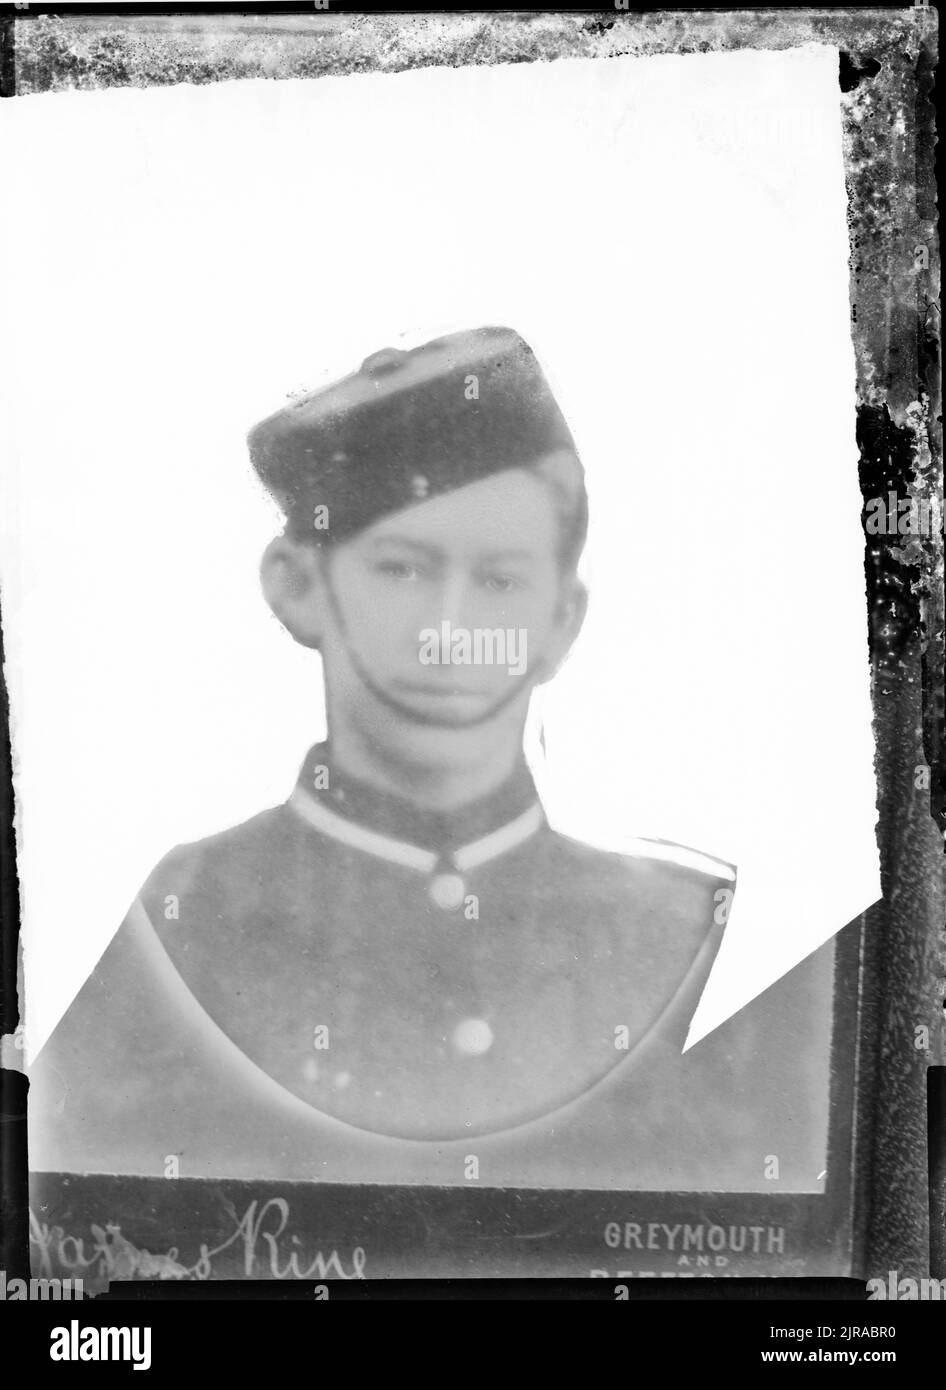 Copy of a portrait of a young man in uniform, circa 1880s, Greymouth, by James Ring, Berry & Co. Stock Photo